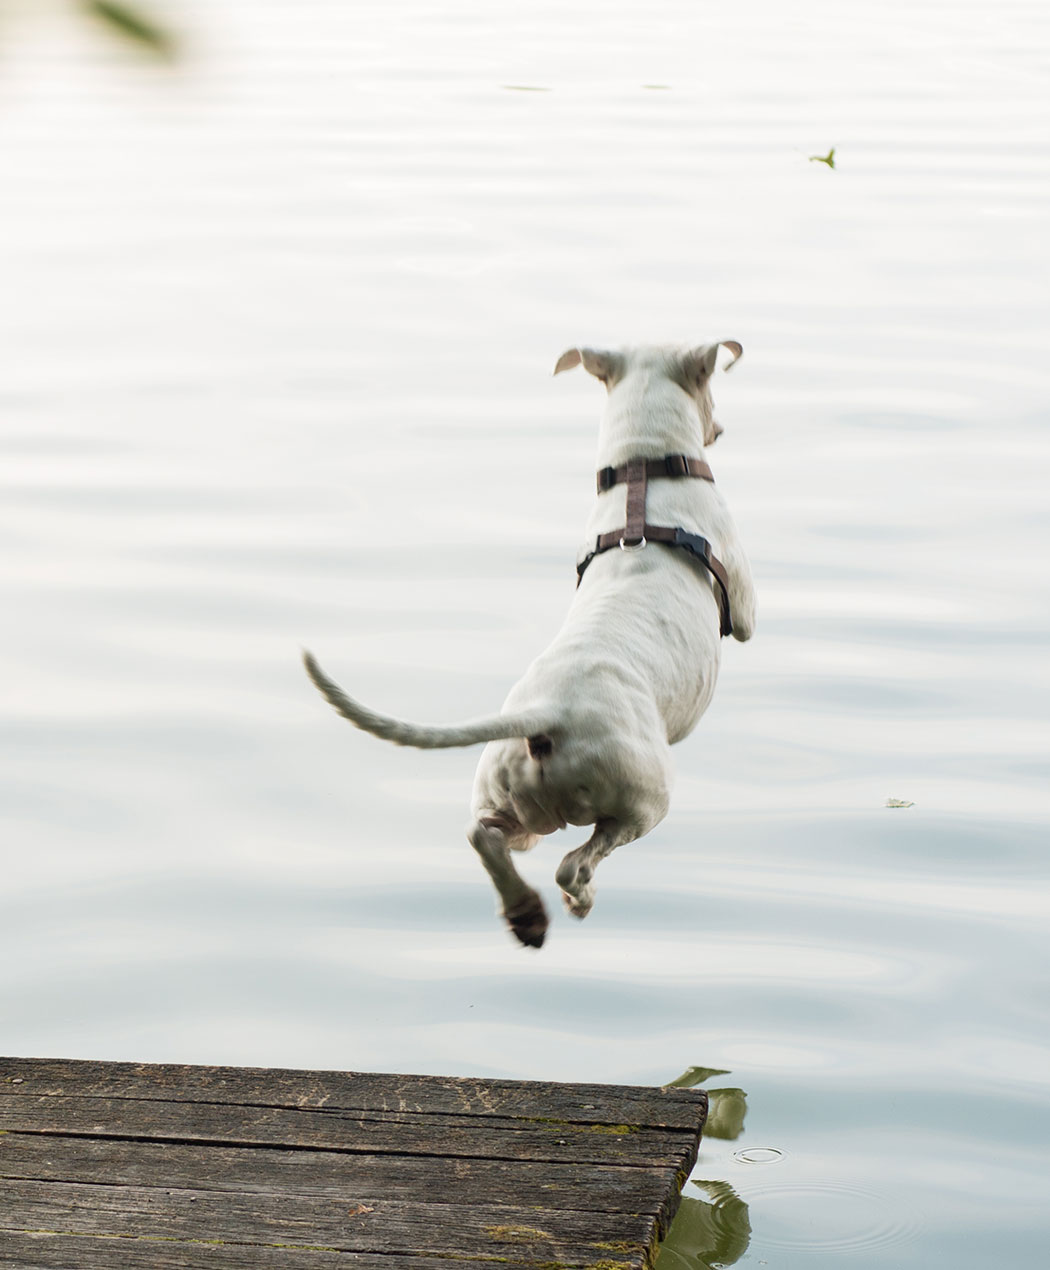 iwhite dog jumping off wooden dock into lake